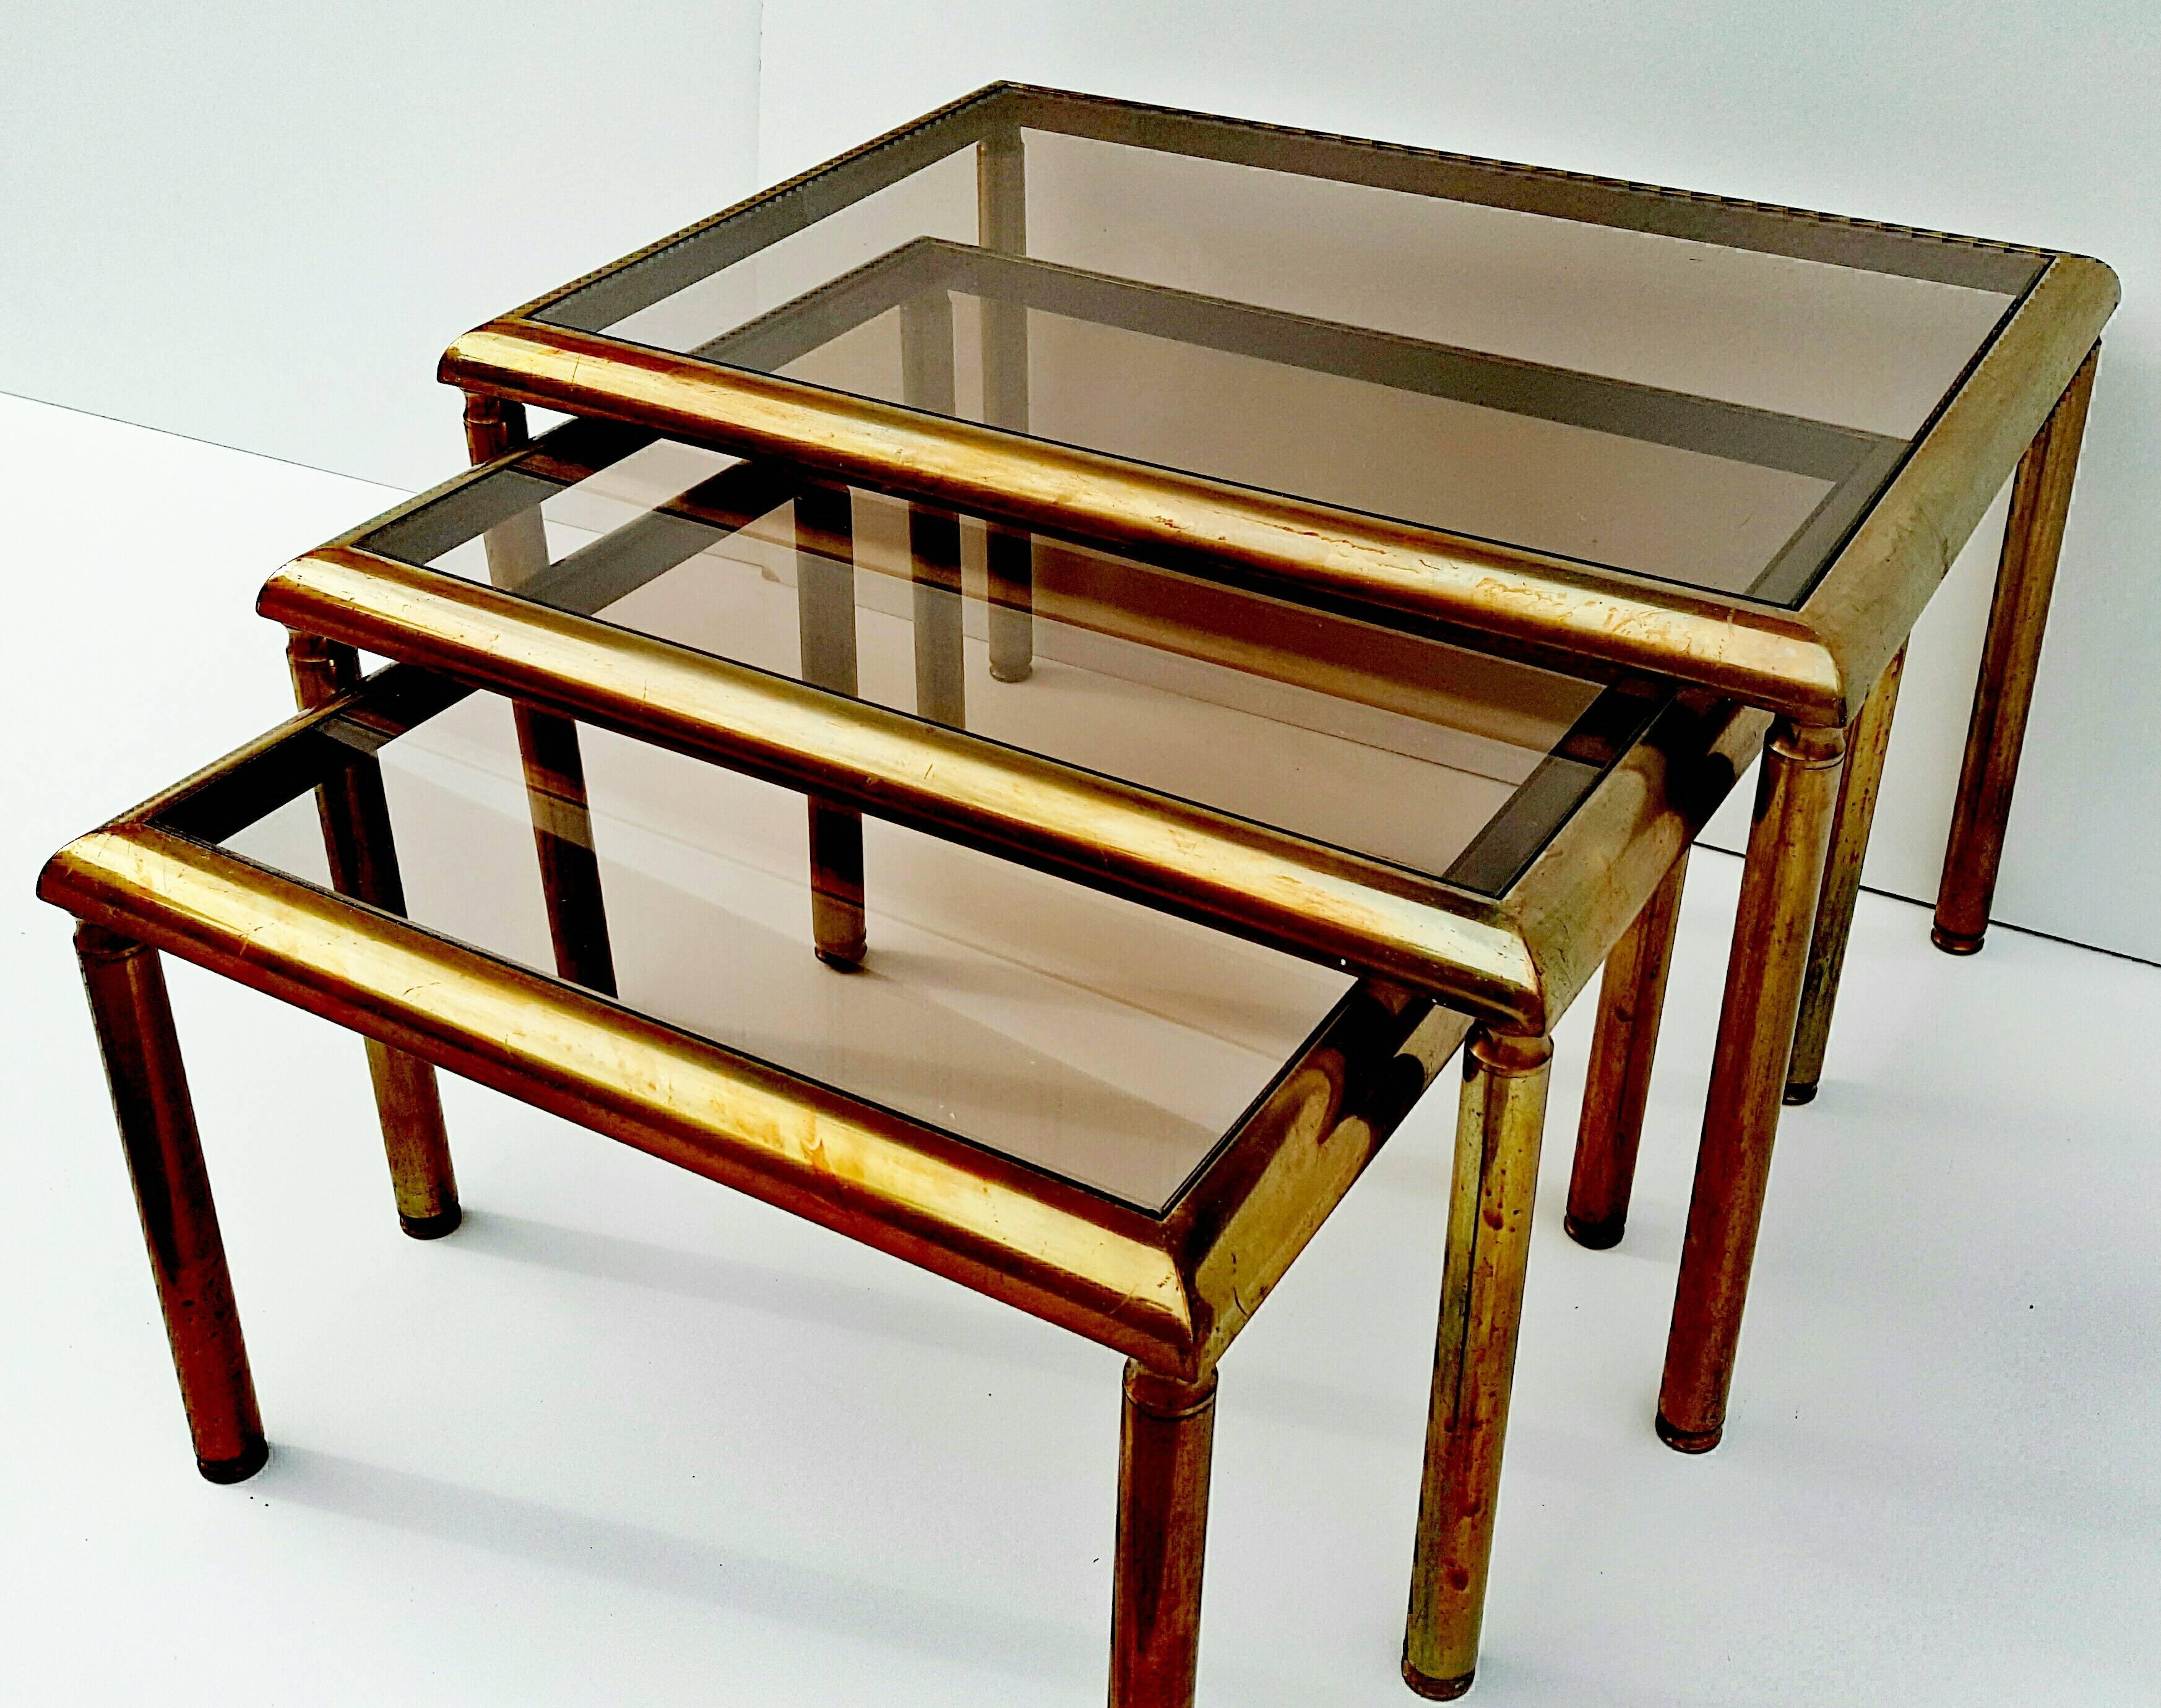 A nest of tables in brass and smoked glass.
Origin, France.
Very good vintage condition.
Big: 54 x 40 x 33.
Middle: 47 x 40 x 29.
Small: 40 x 40 x 26.